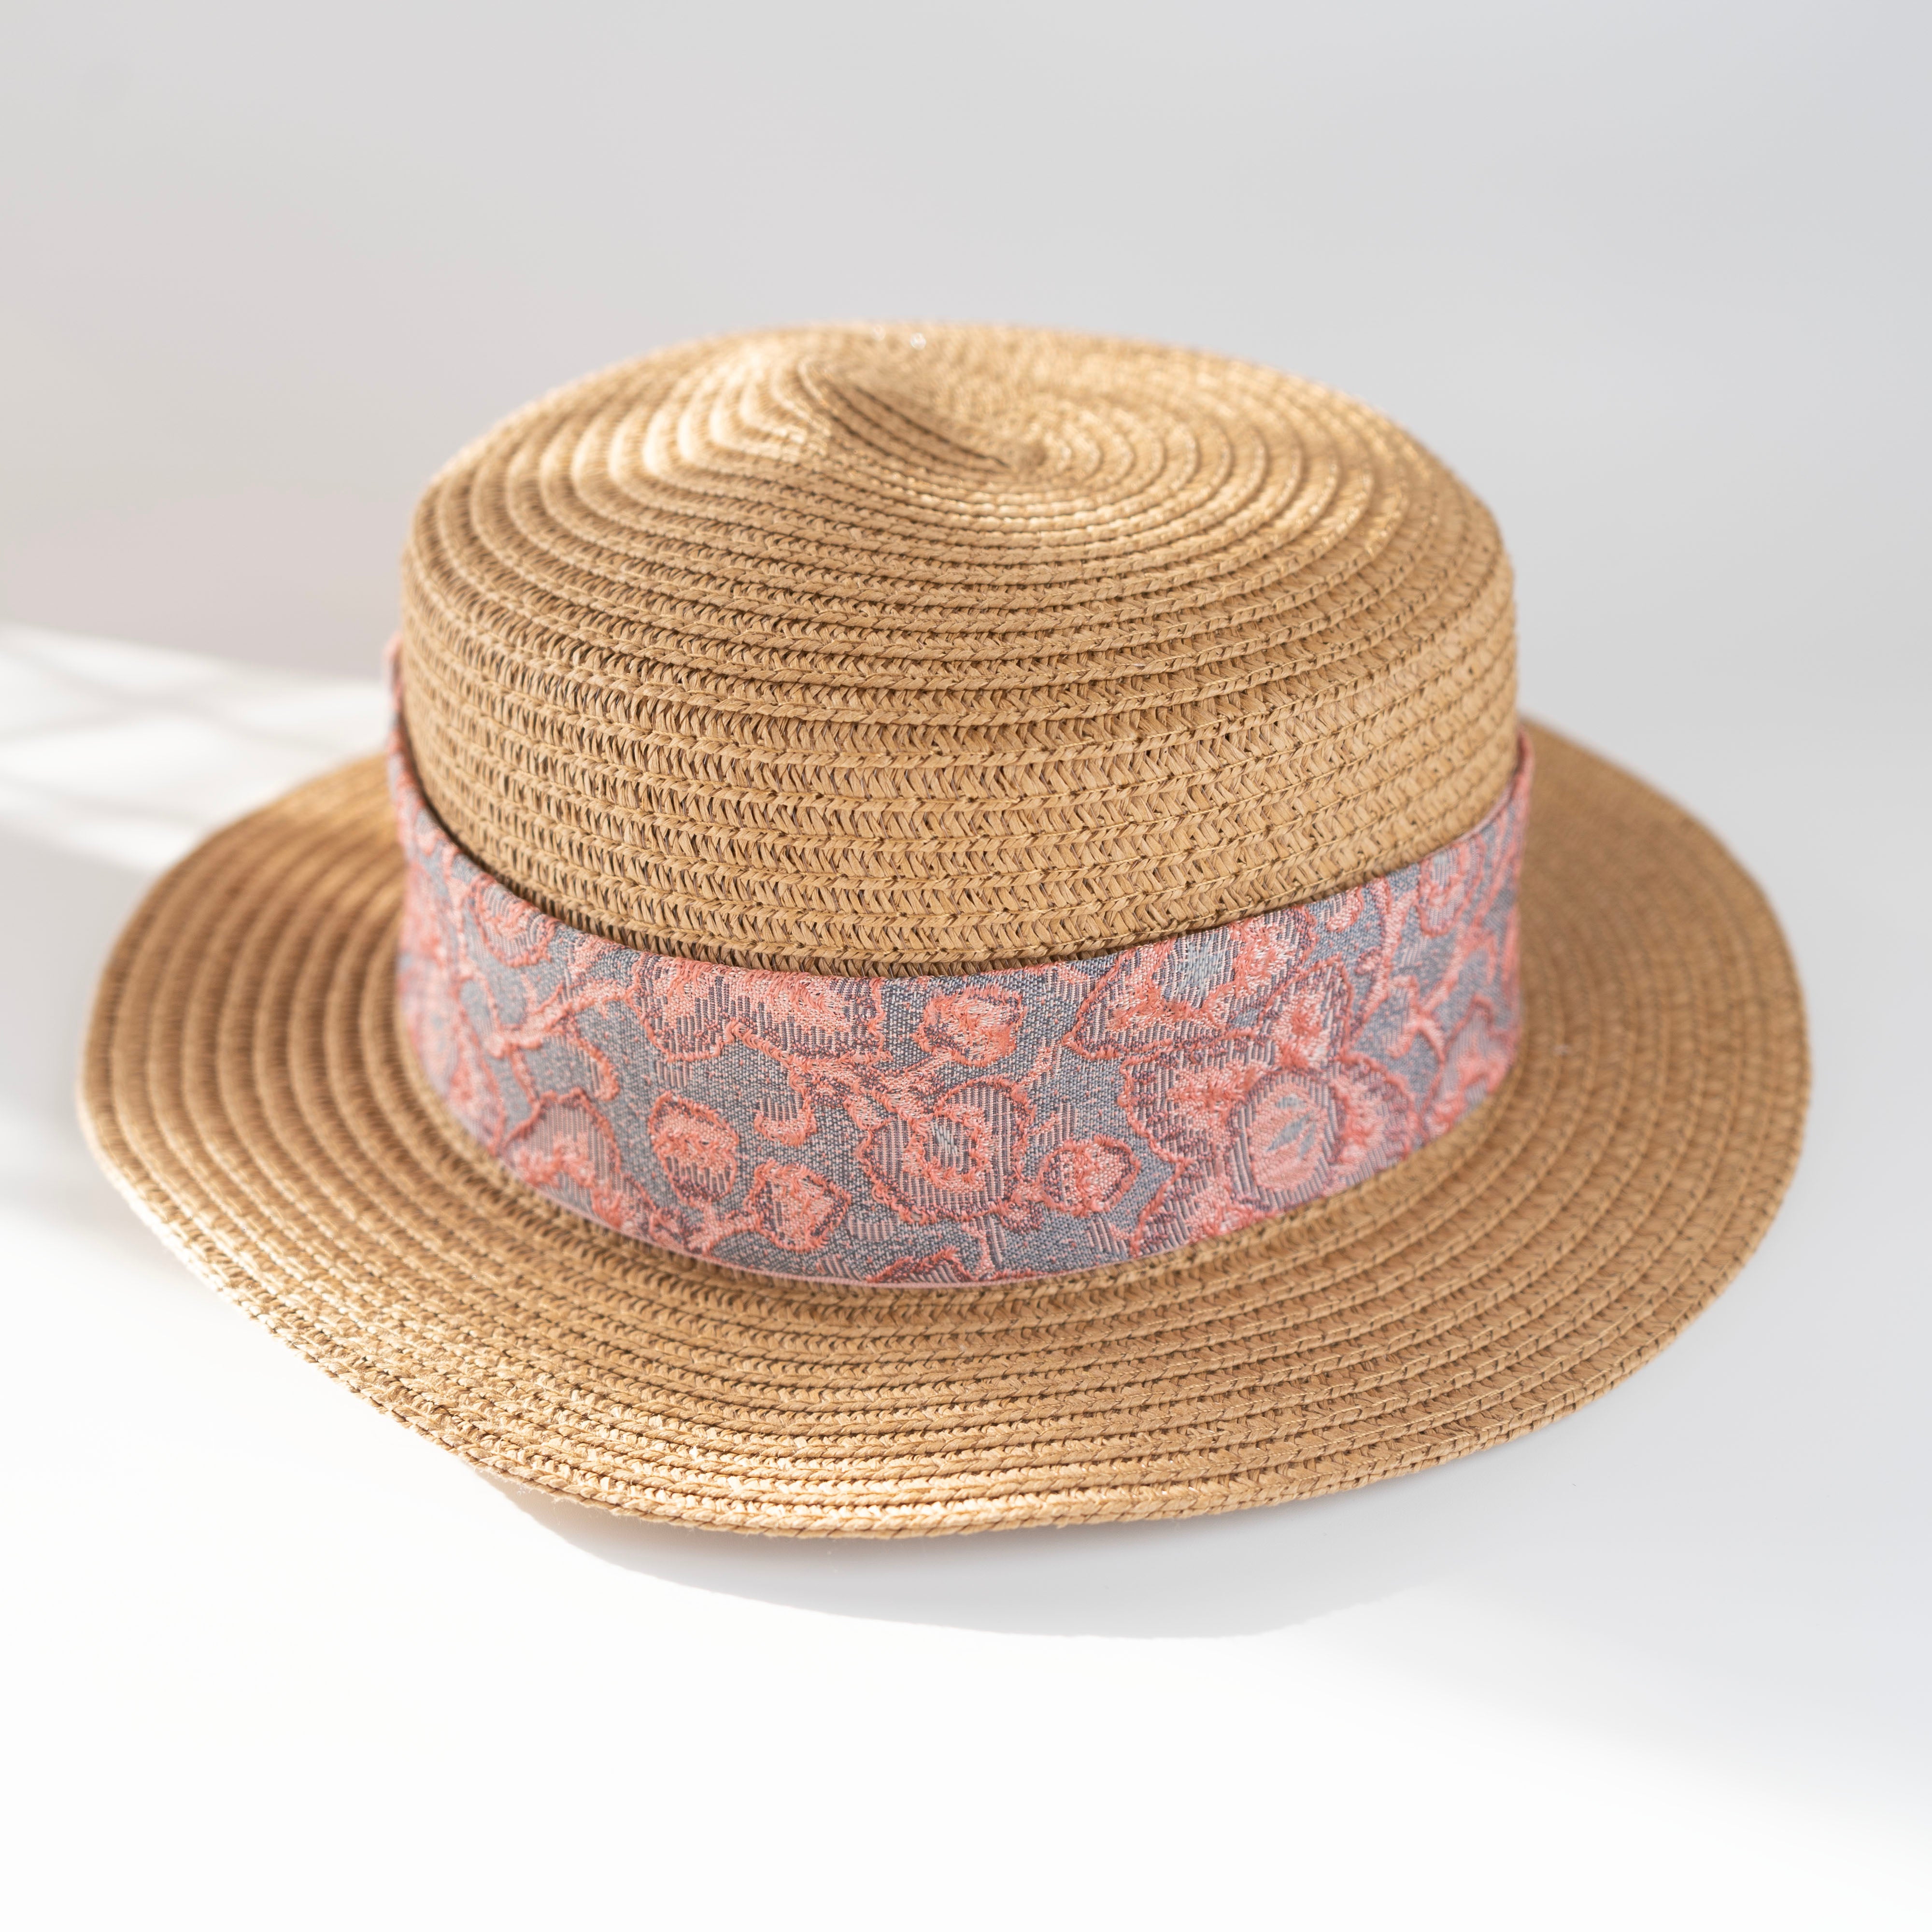 A hat made of recycled kimono (obi) / 着物帯を使った麦わら帽子